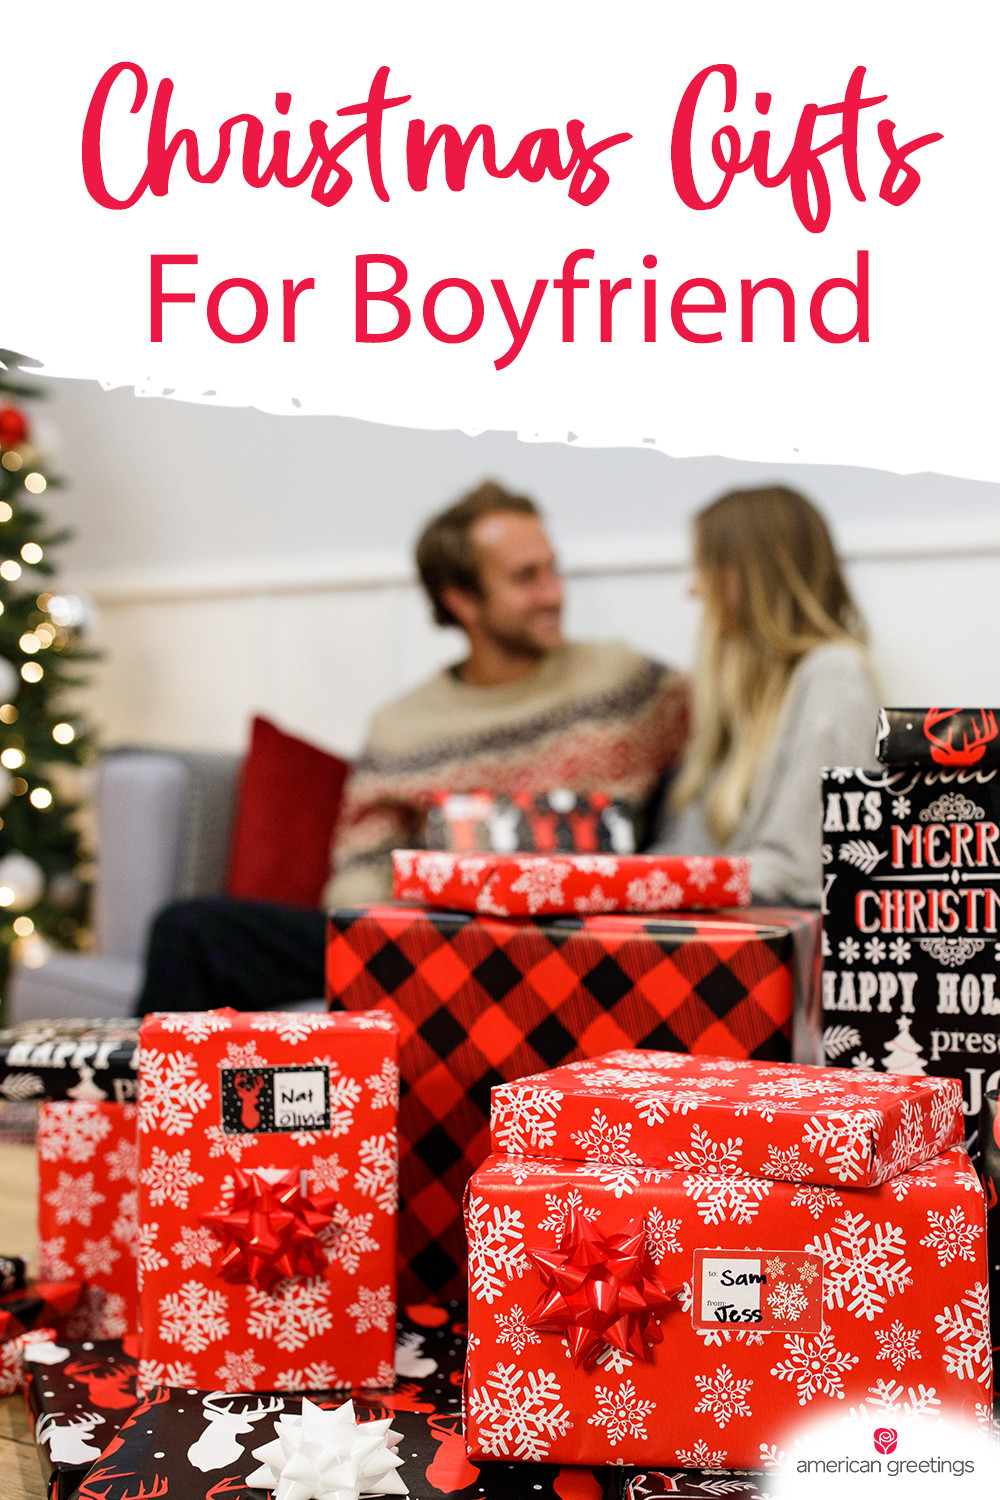 Thoughtful Gift Ideas For Boyfriends
 Christmas Gift Ideas For A Boyfriend Tips For Finding Him